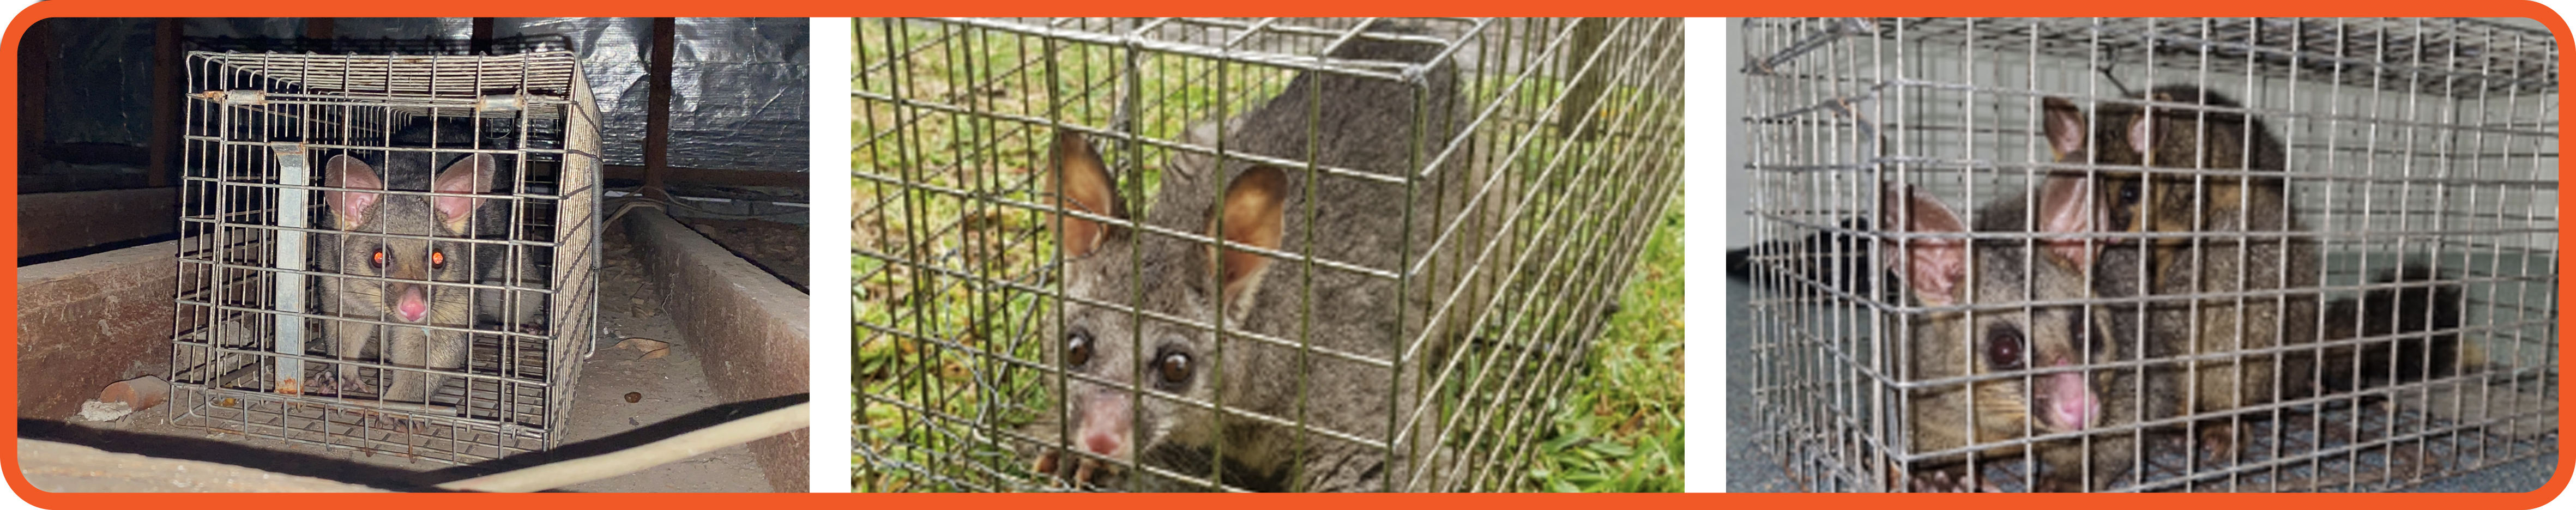 A small animal in a cageDescription automatically generated